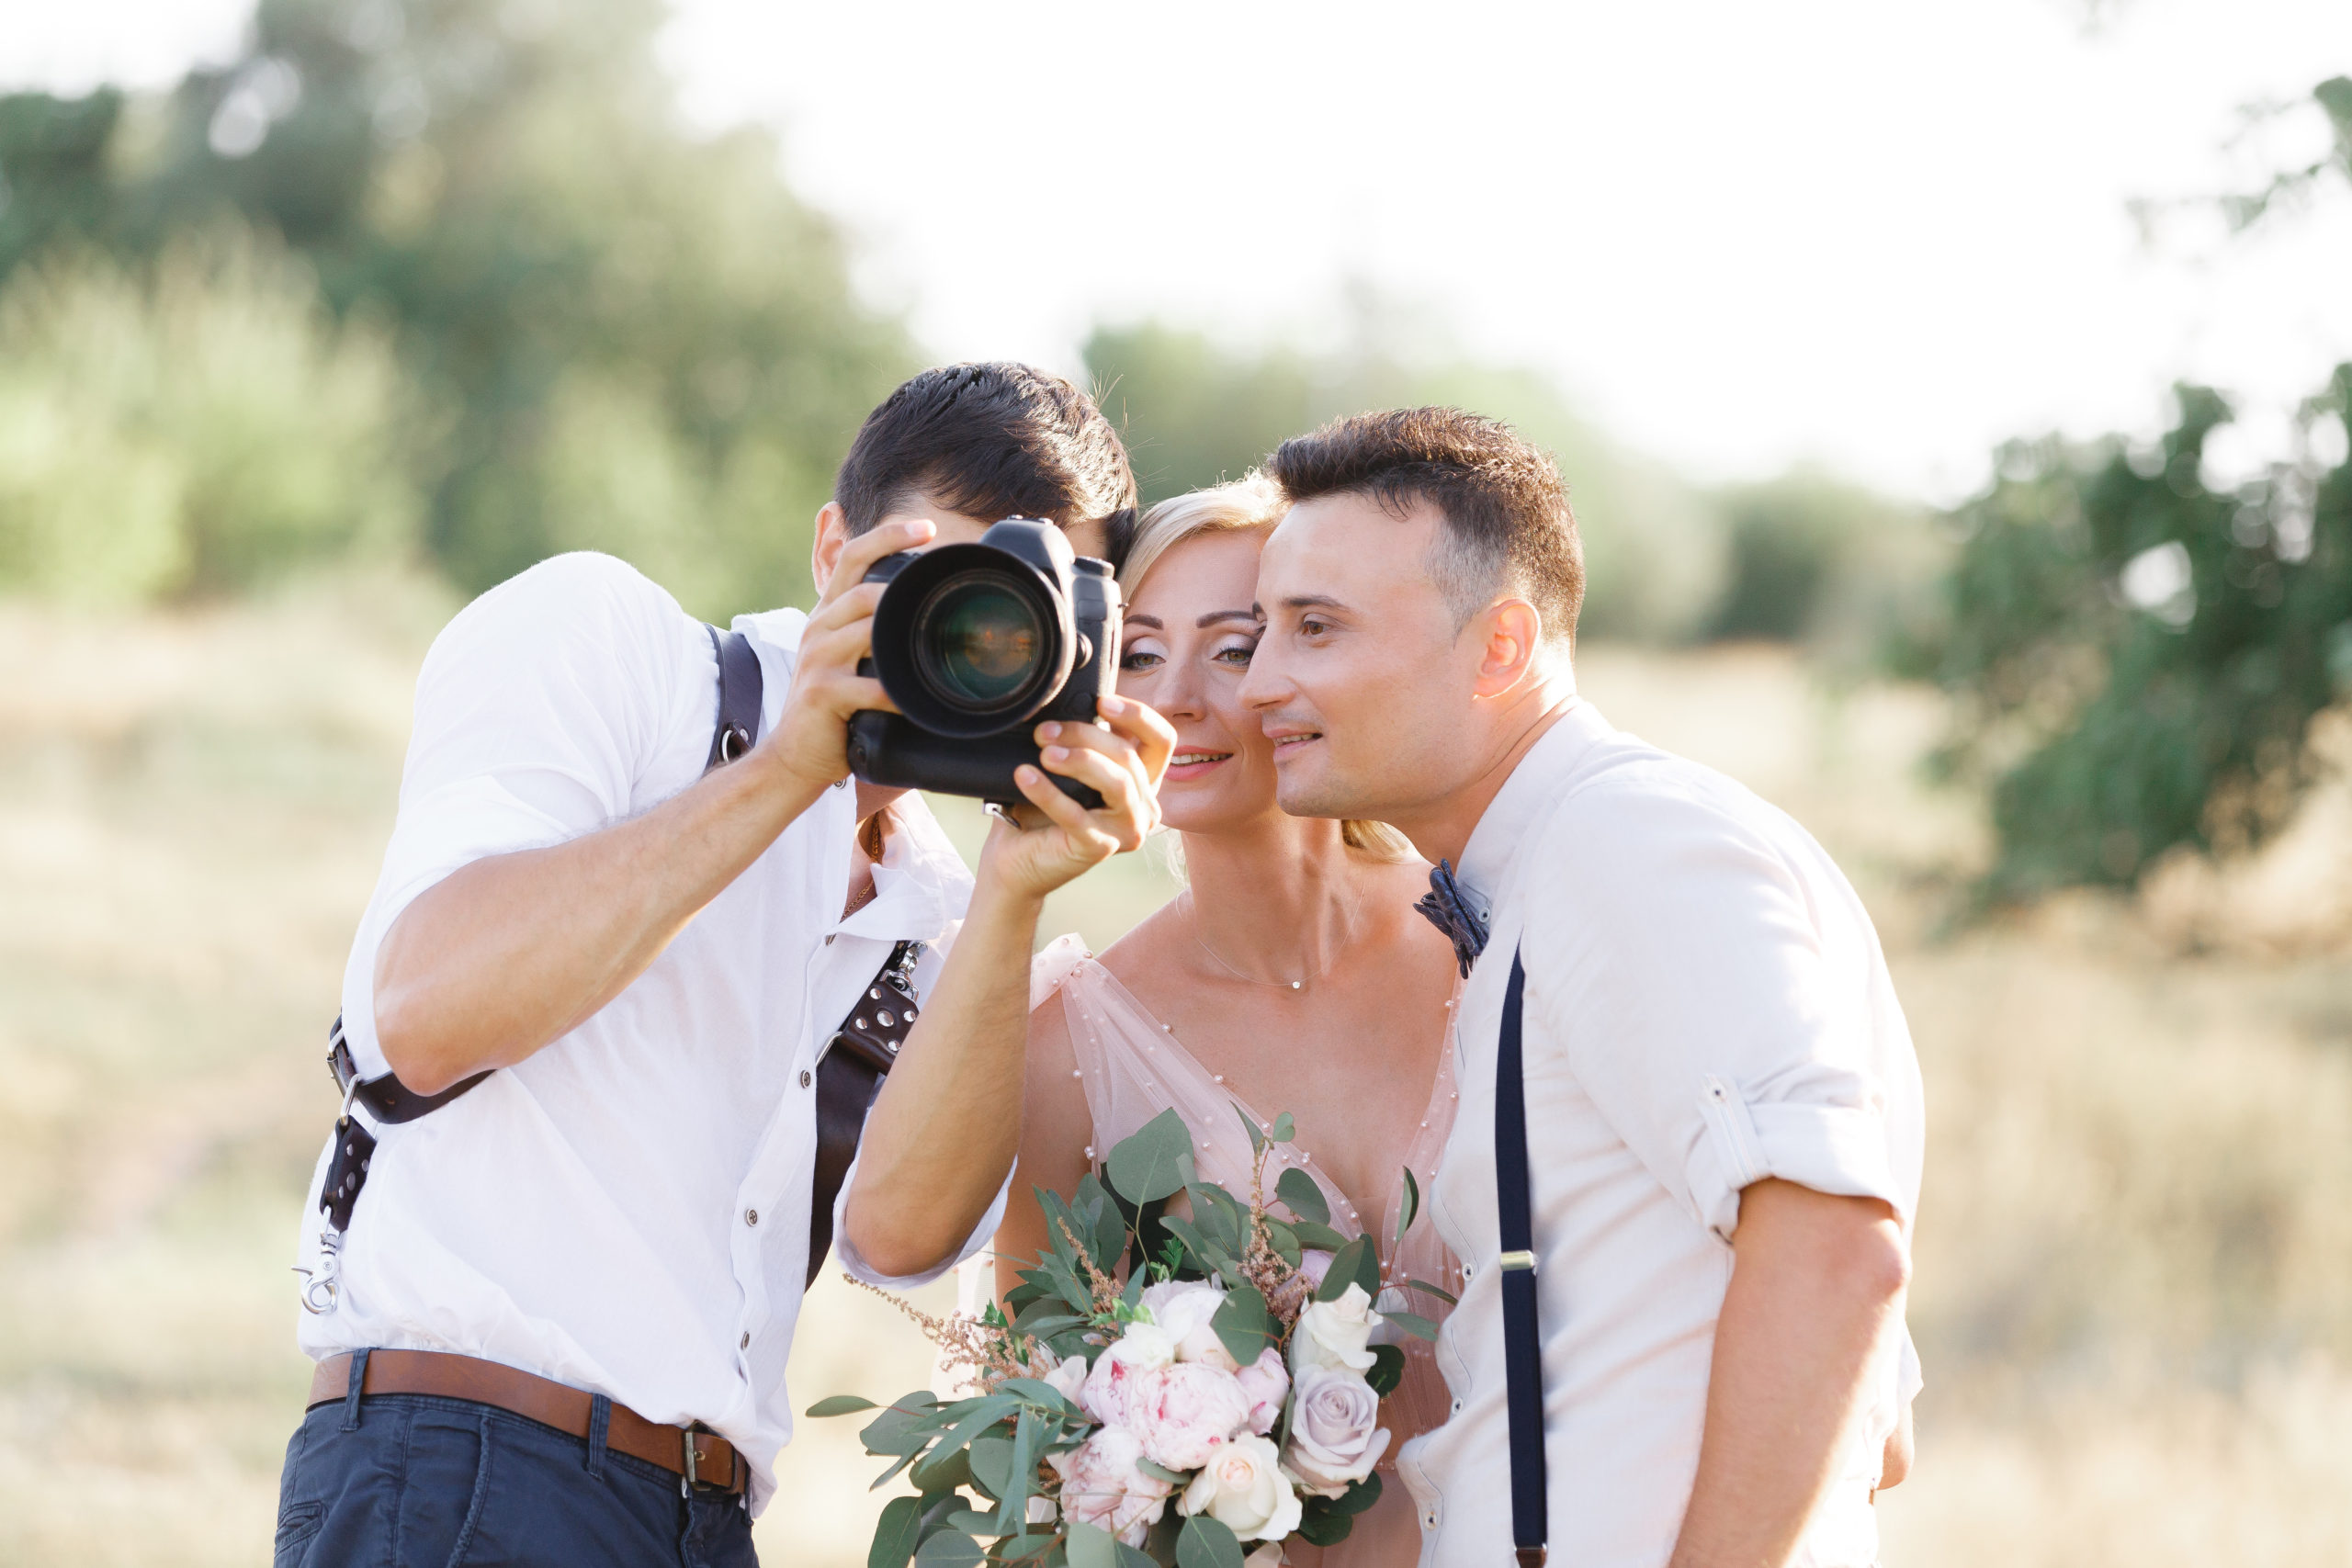 wedding photographer takes pictures of bride and groom